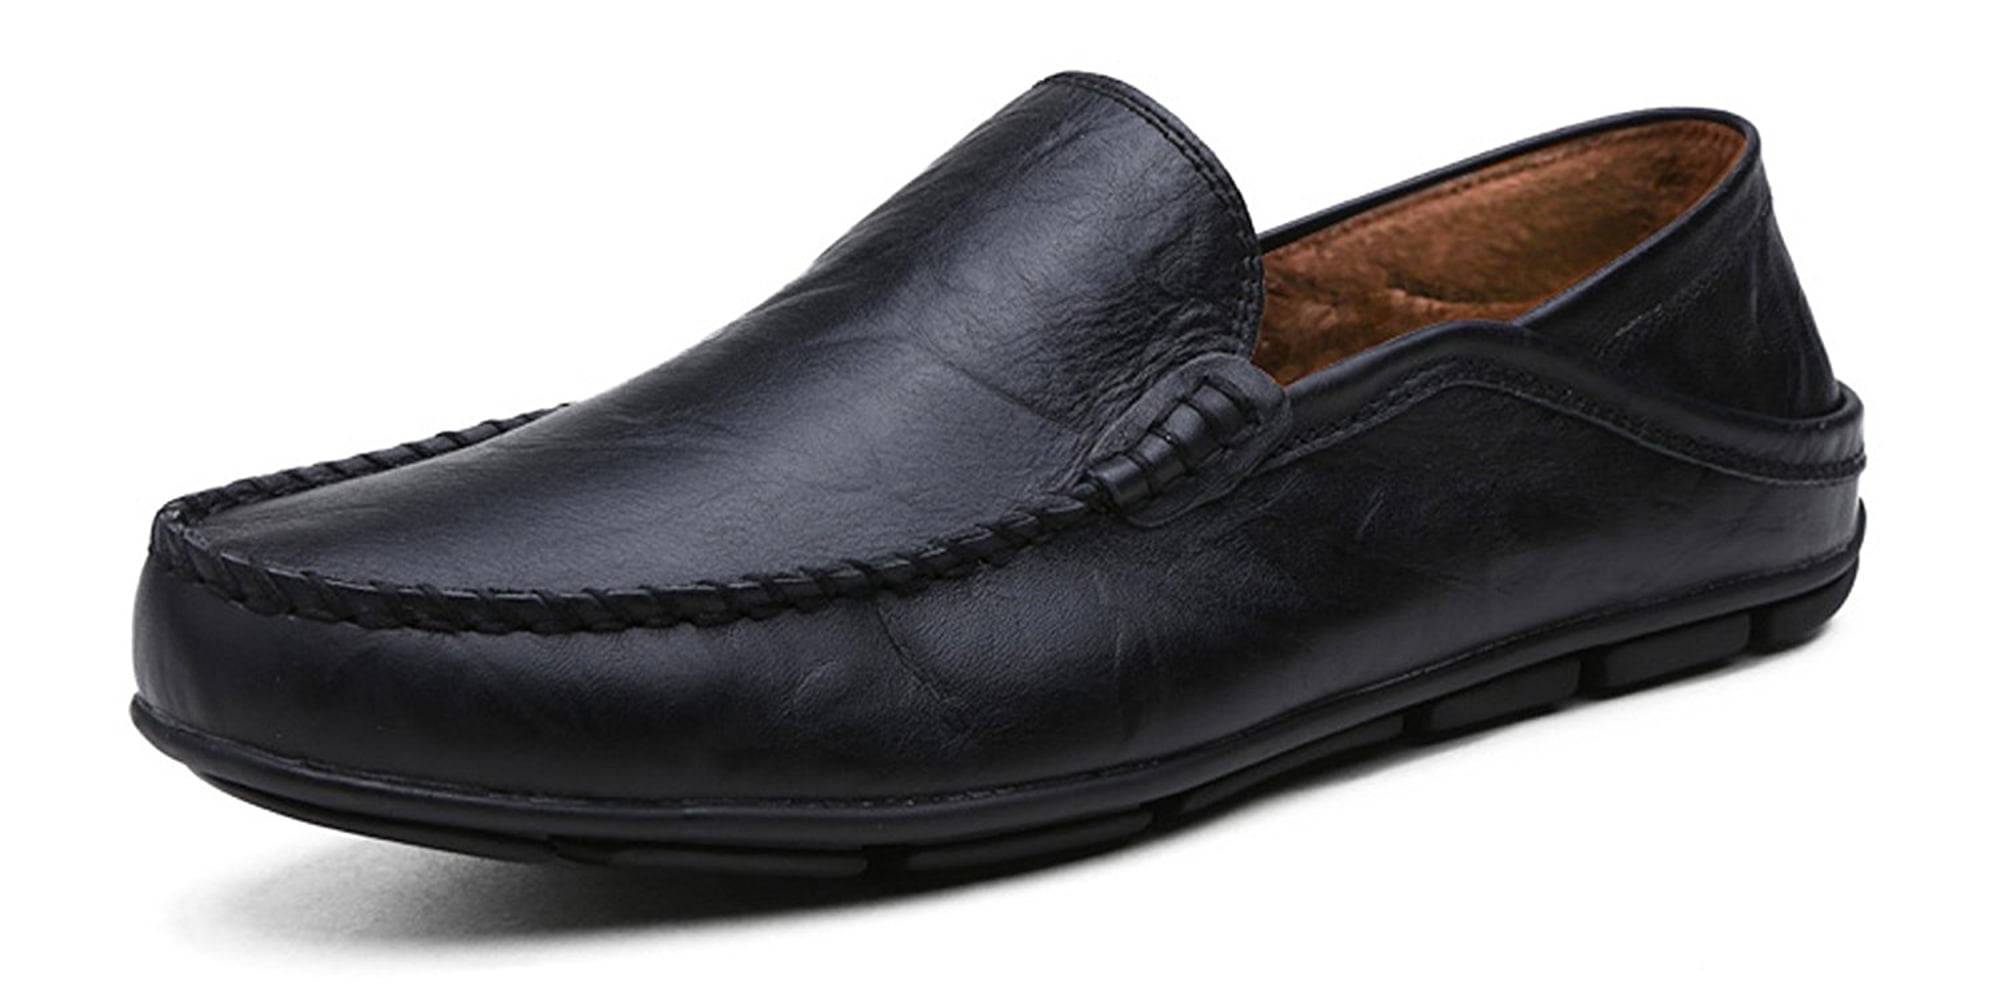 Go Tour Men’s Casual Leather Fashion Slip-on Loafers Shoes 